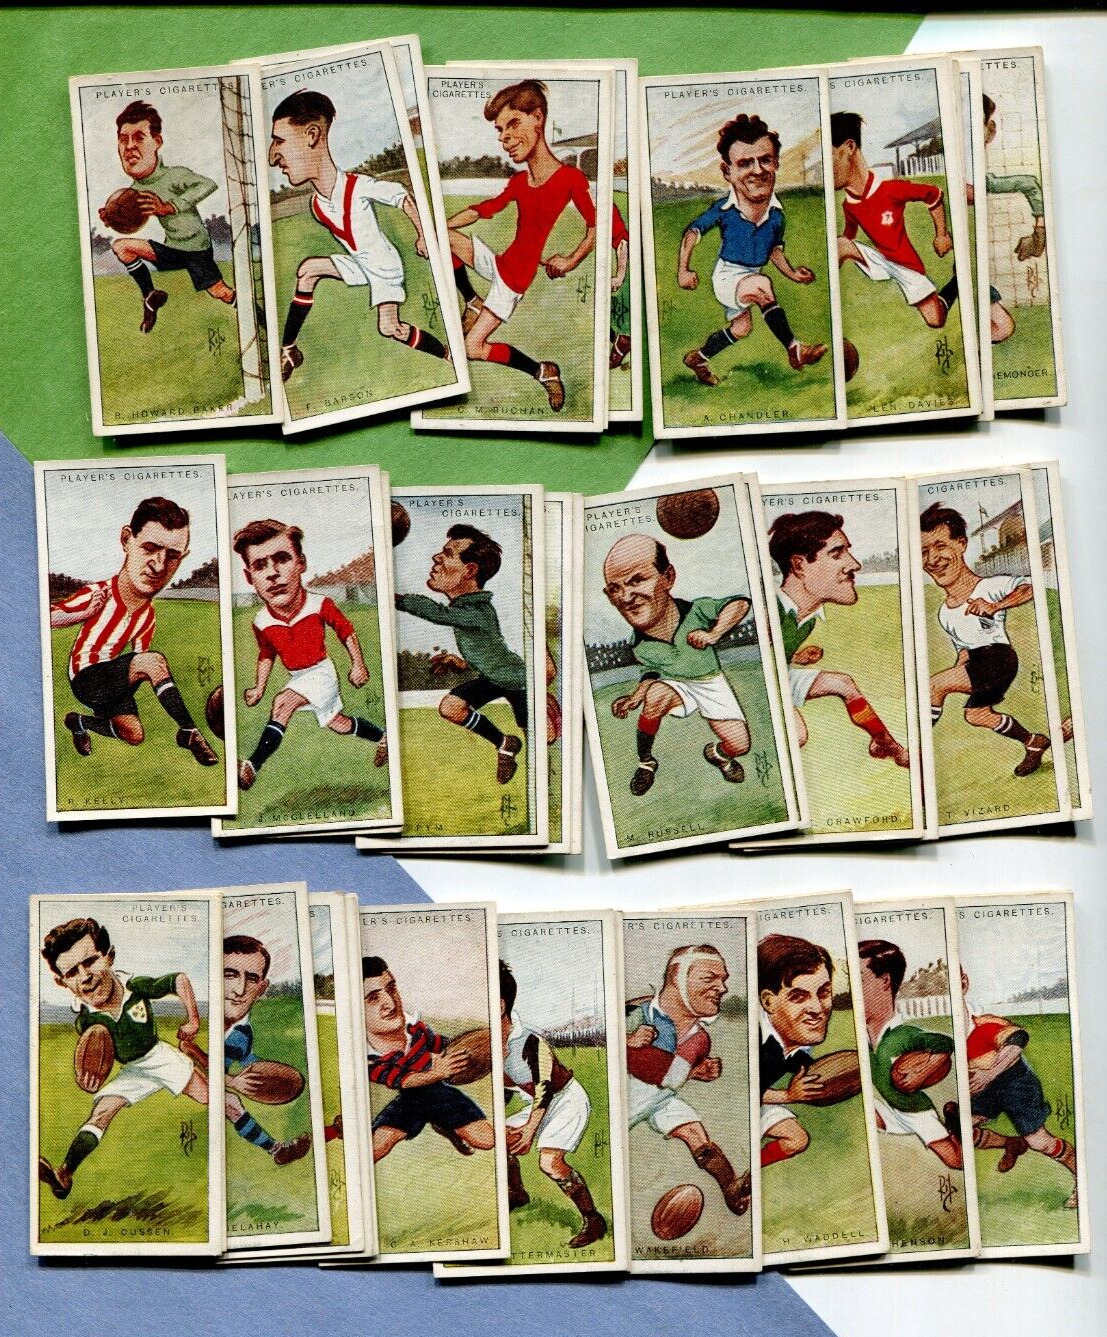 1926 JOHN PLAYER & SONS CIGARETTES FOOTBALLERS BY RIP 50 TOBACCO CARD SET